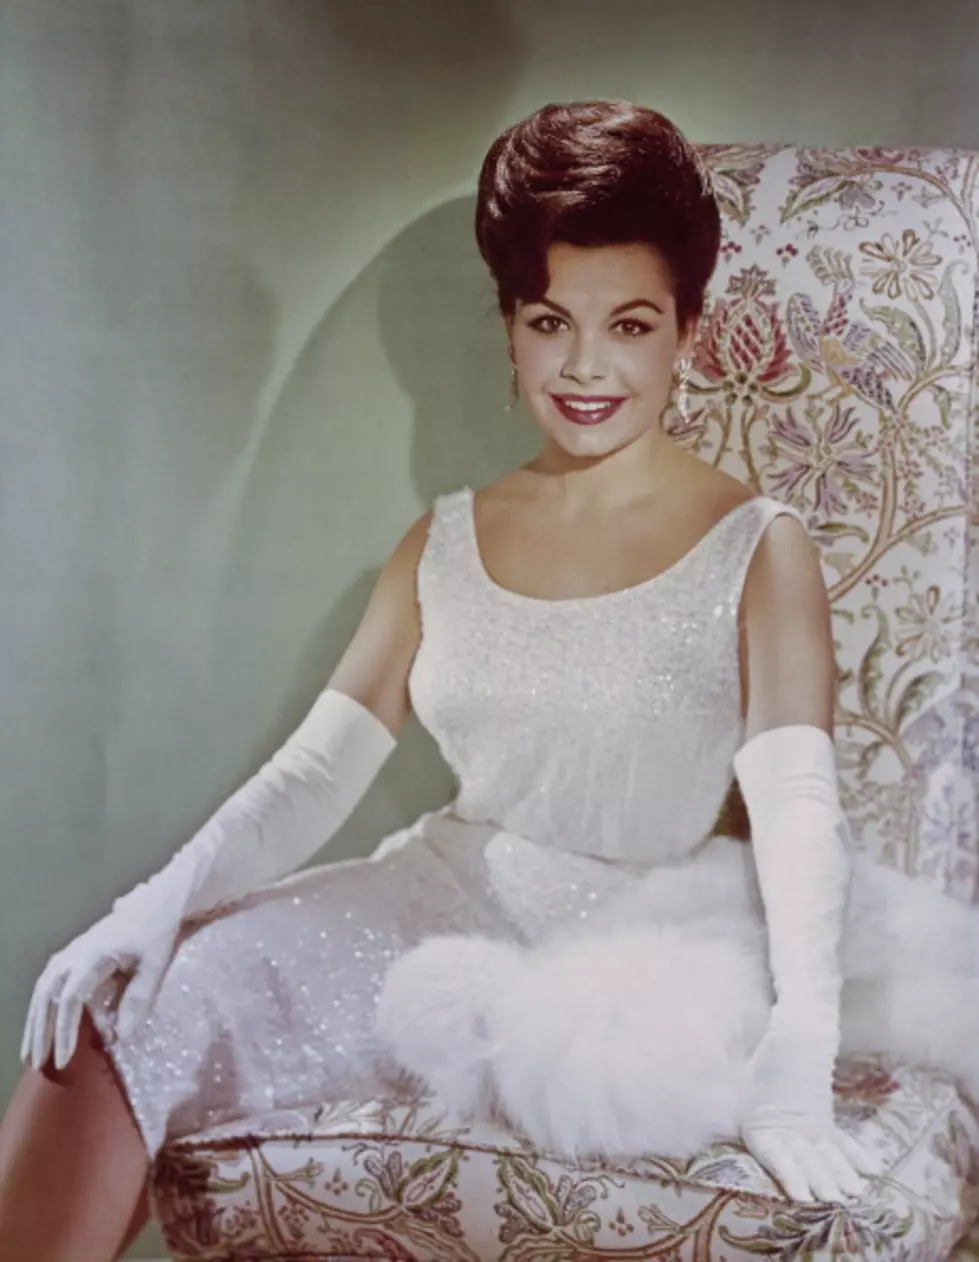 Annette Funicello Honored As NY Historic Woman Of Distinction [VIDEO]